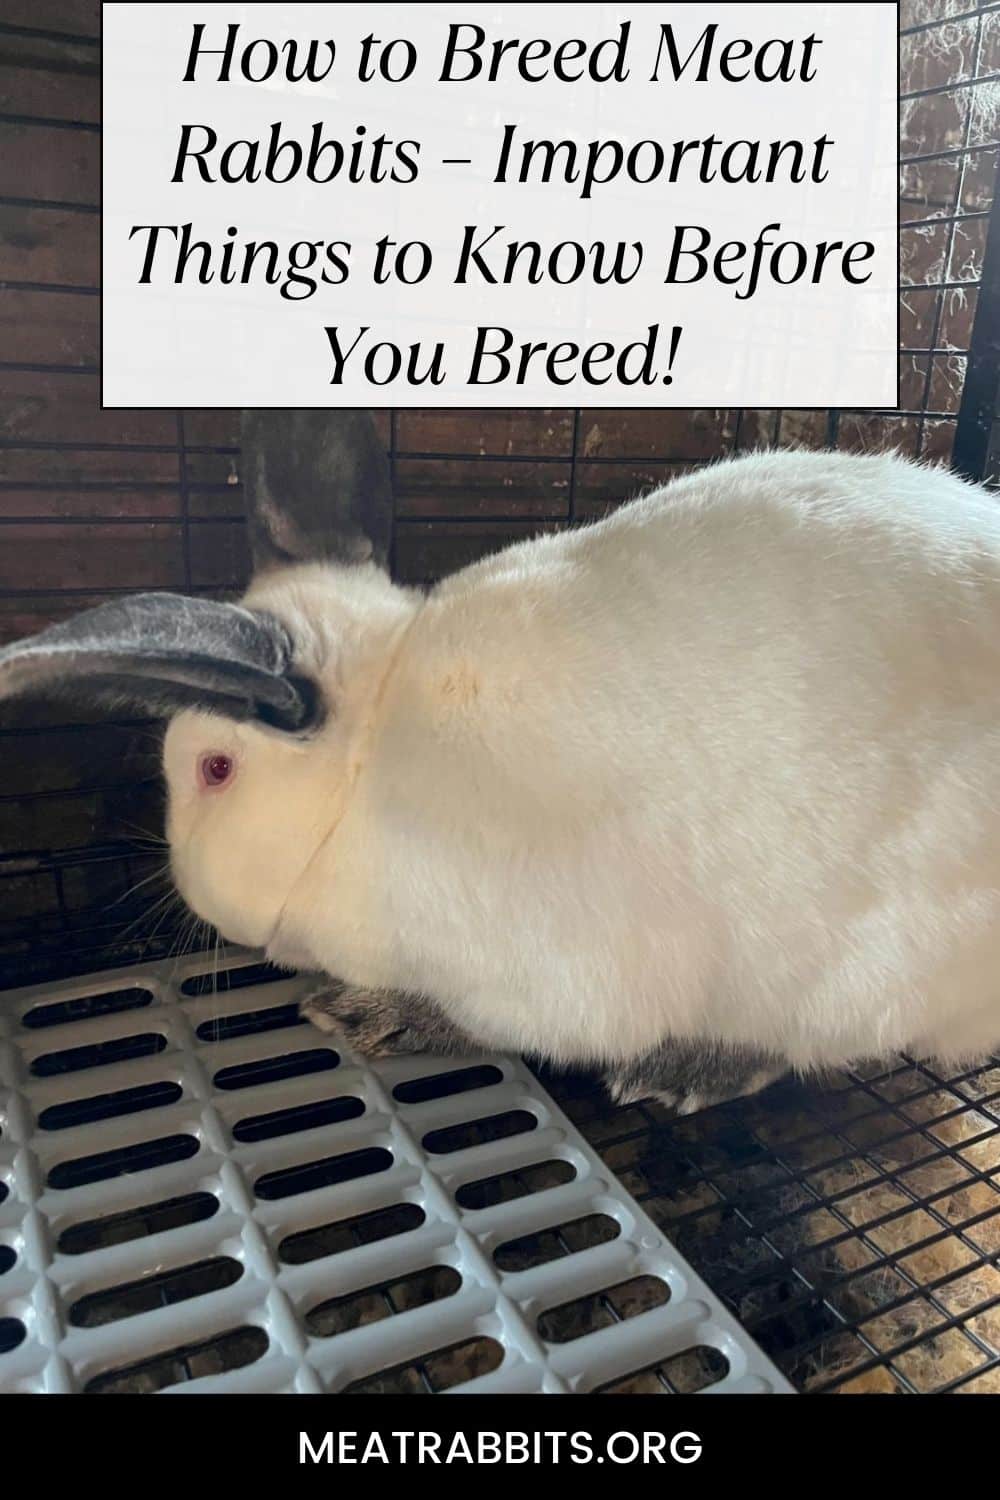 How to Breed Meat Rabbits – Important Things to Know Before You Breed! pinterest image.